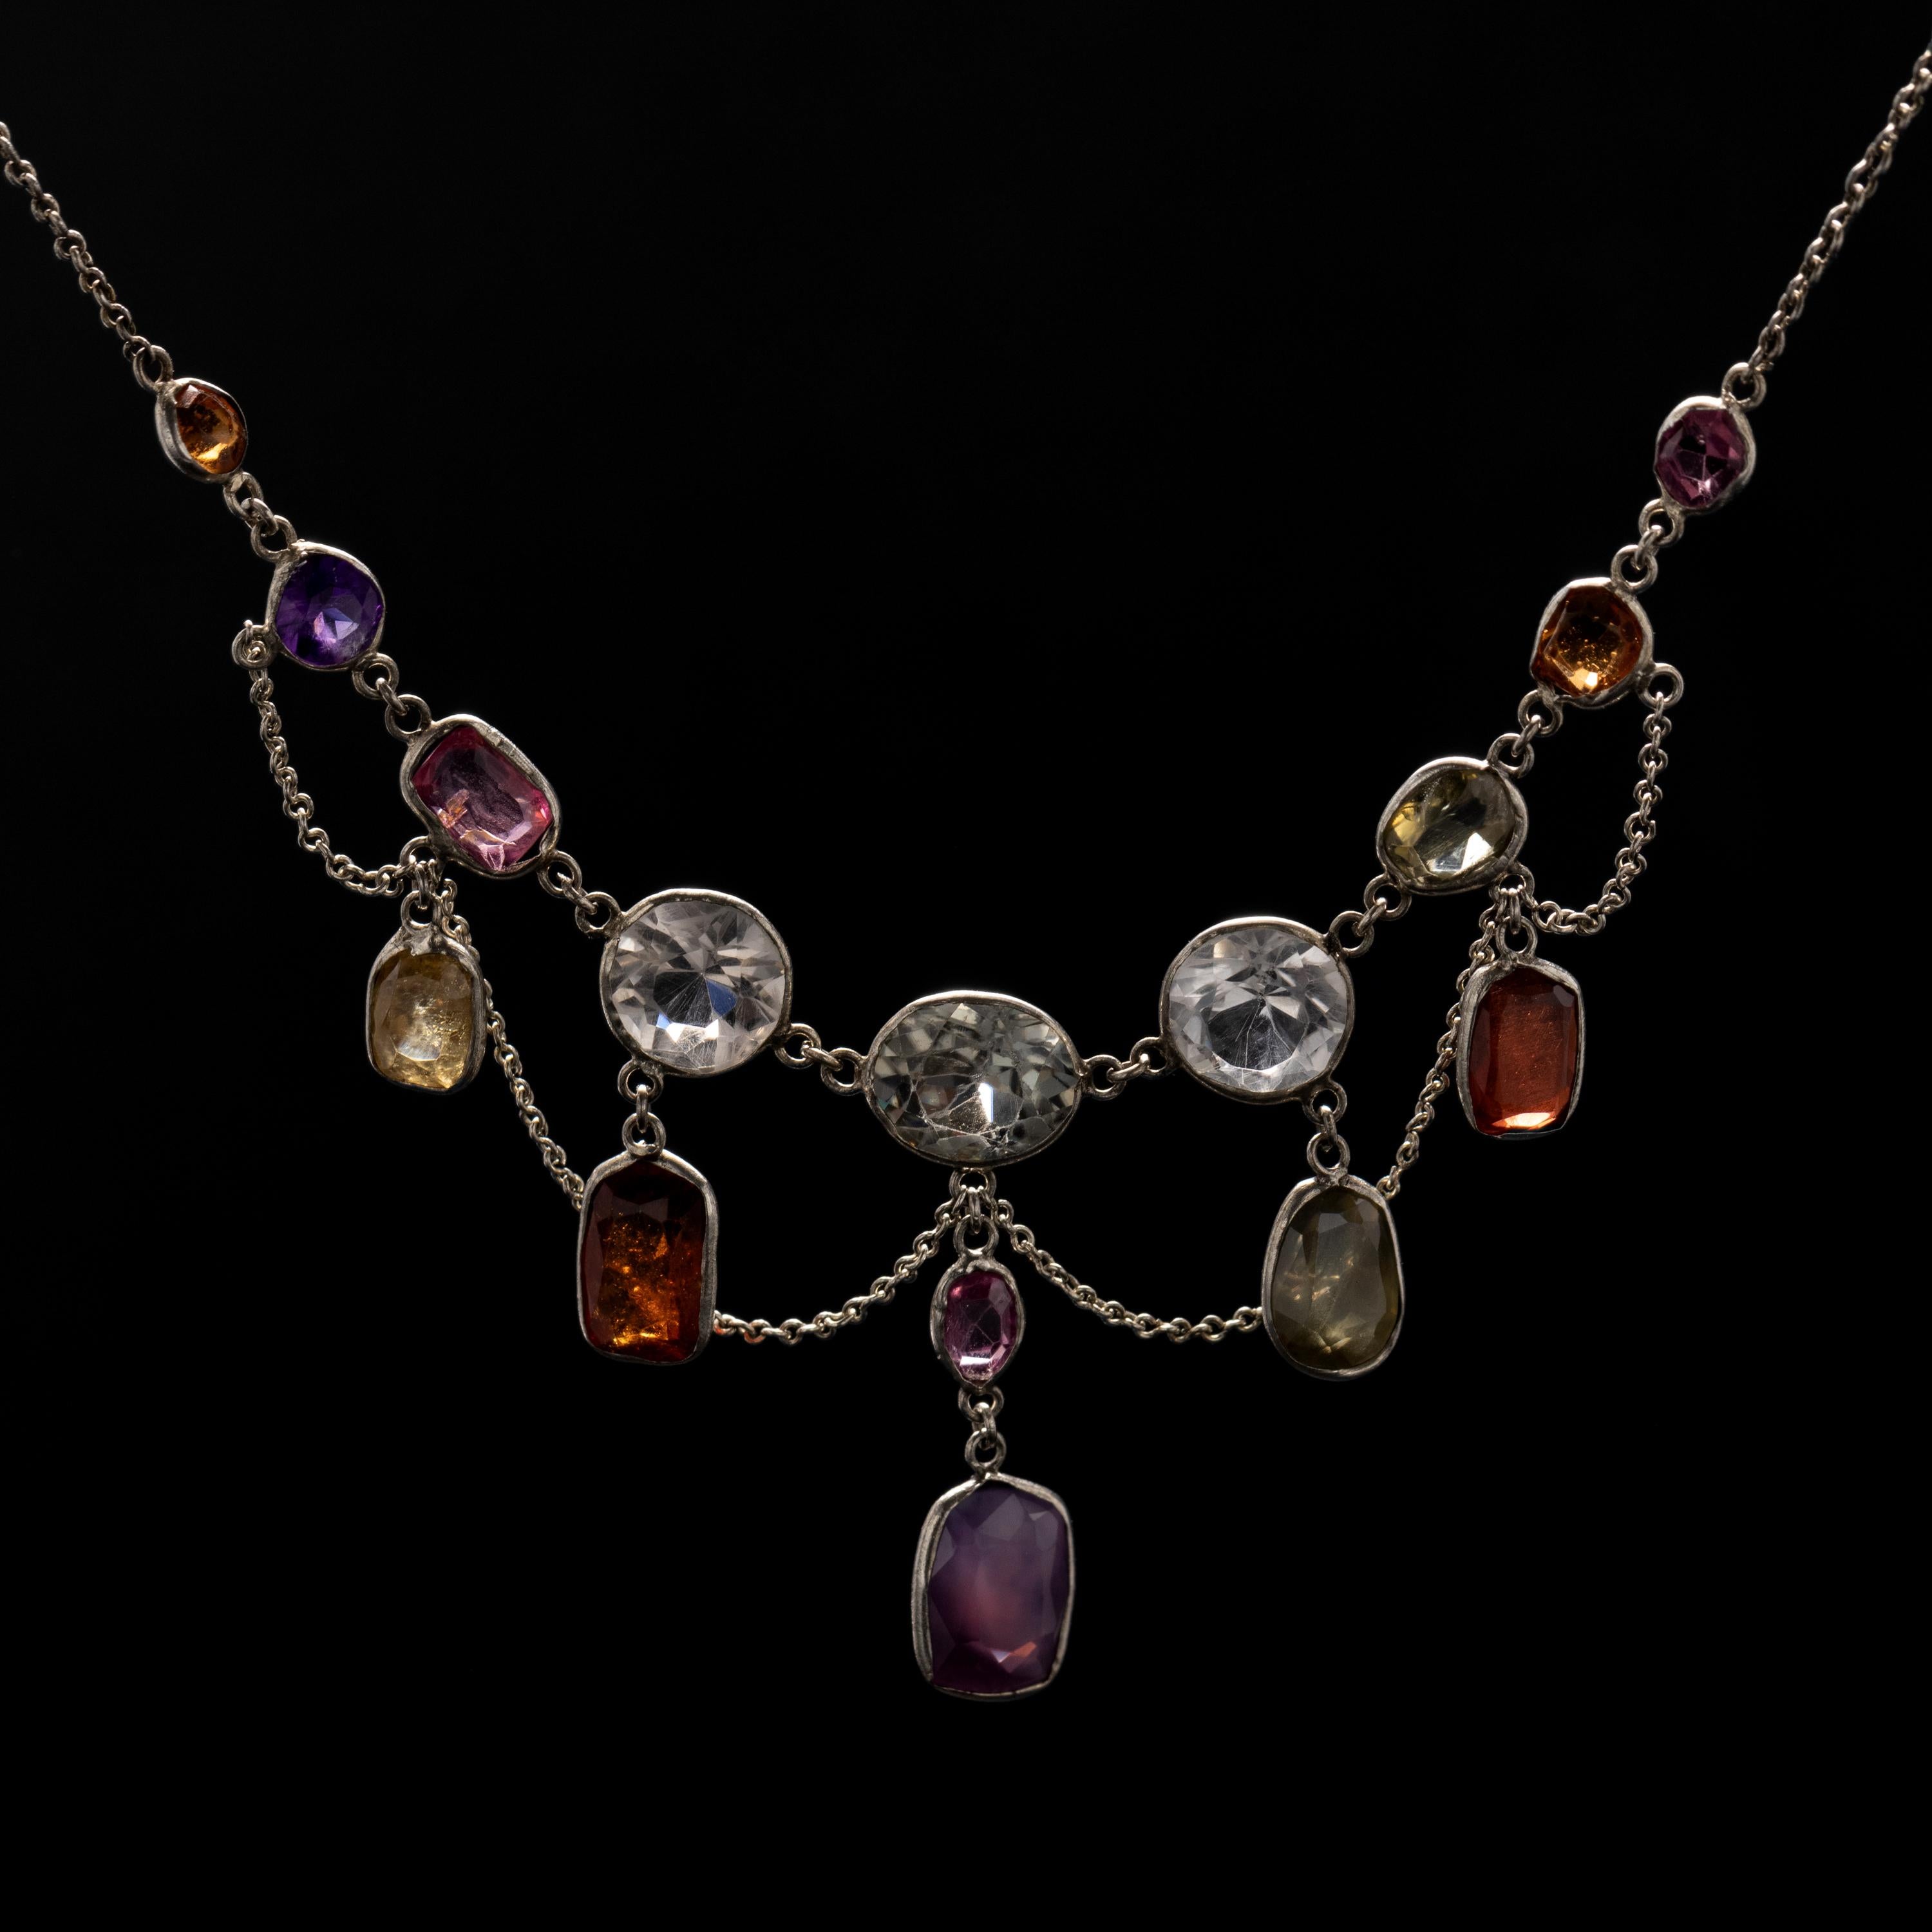 Delicate though powerful: that's how I would describe this rare and exceptionally beautiful Edwardian-era festoon necklace. Crafted entirely by hand just after the turn of the previous century (circa 1901), this 15